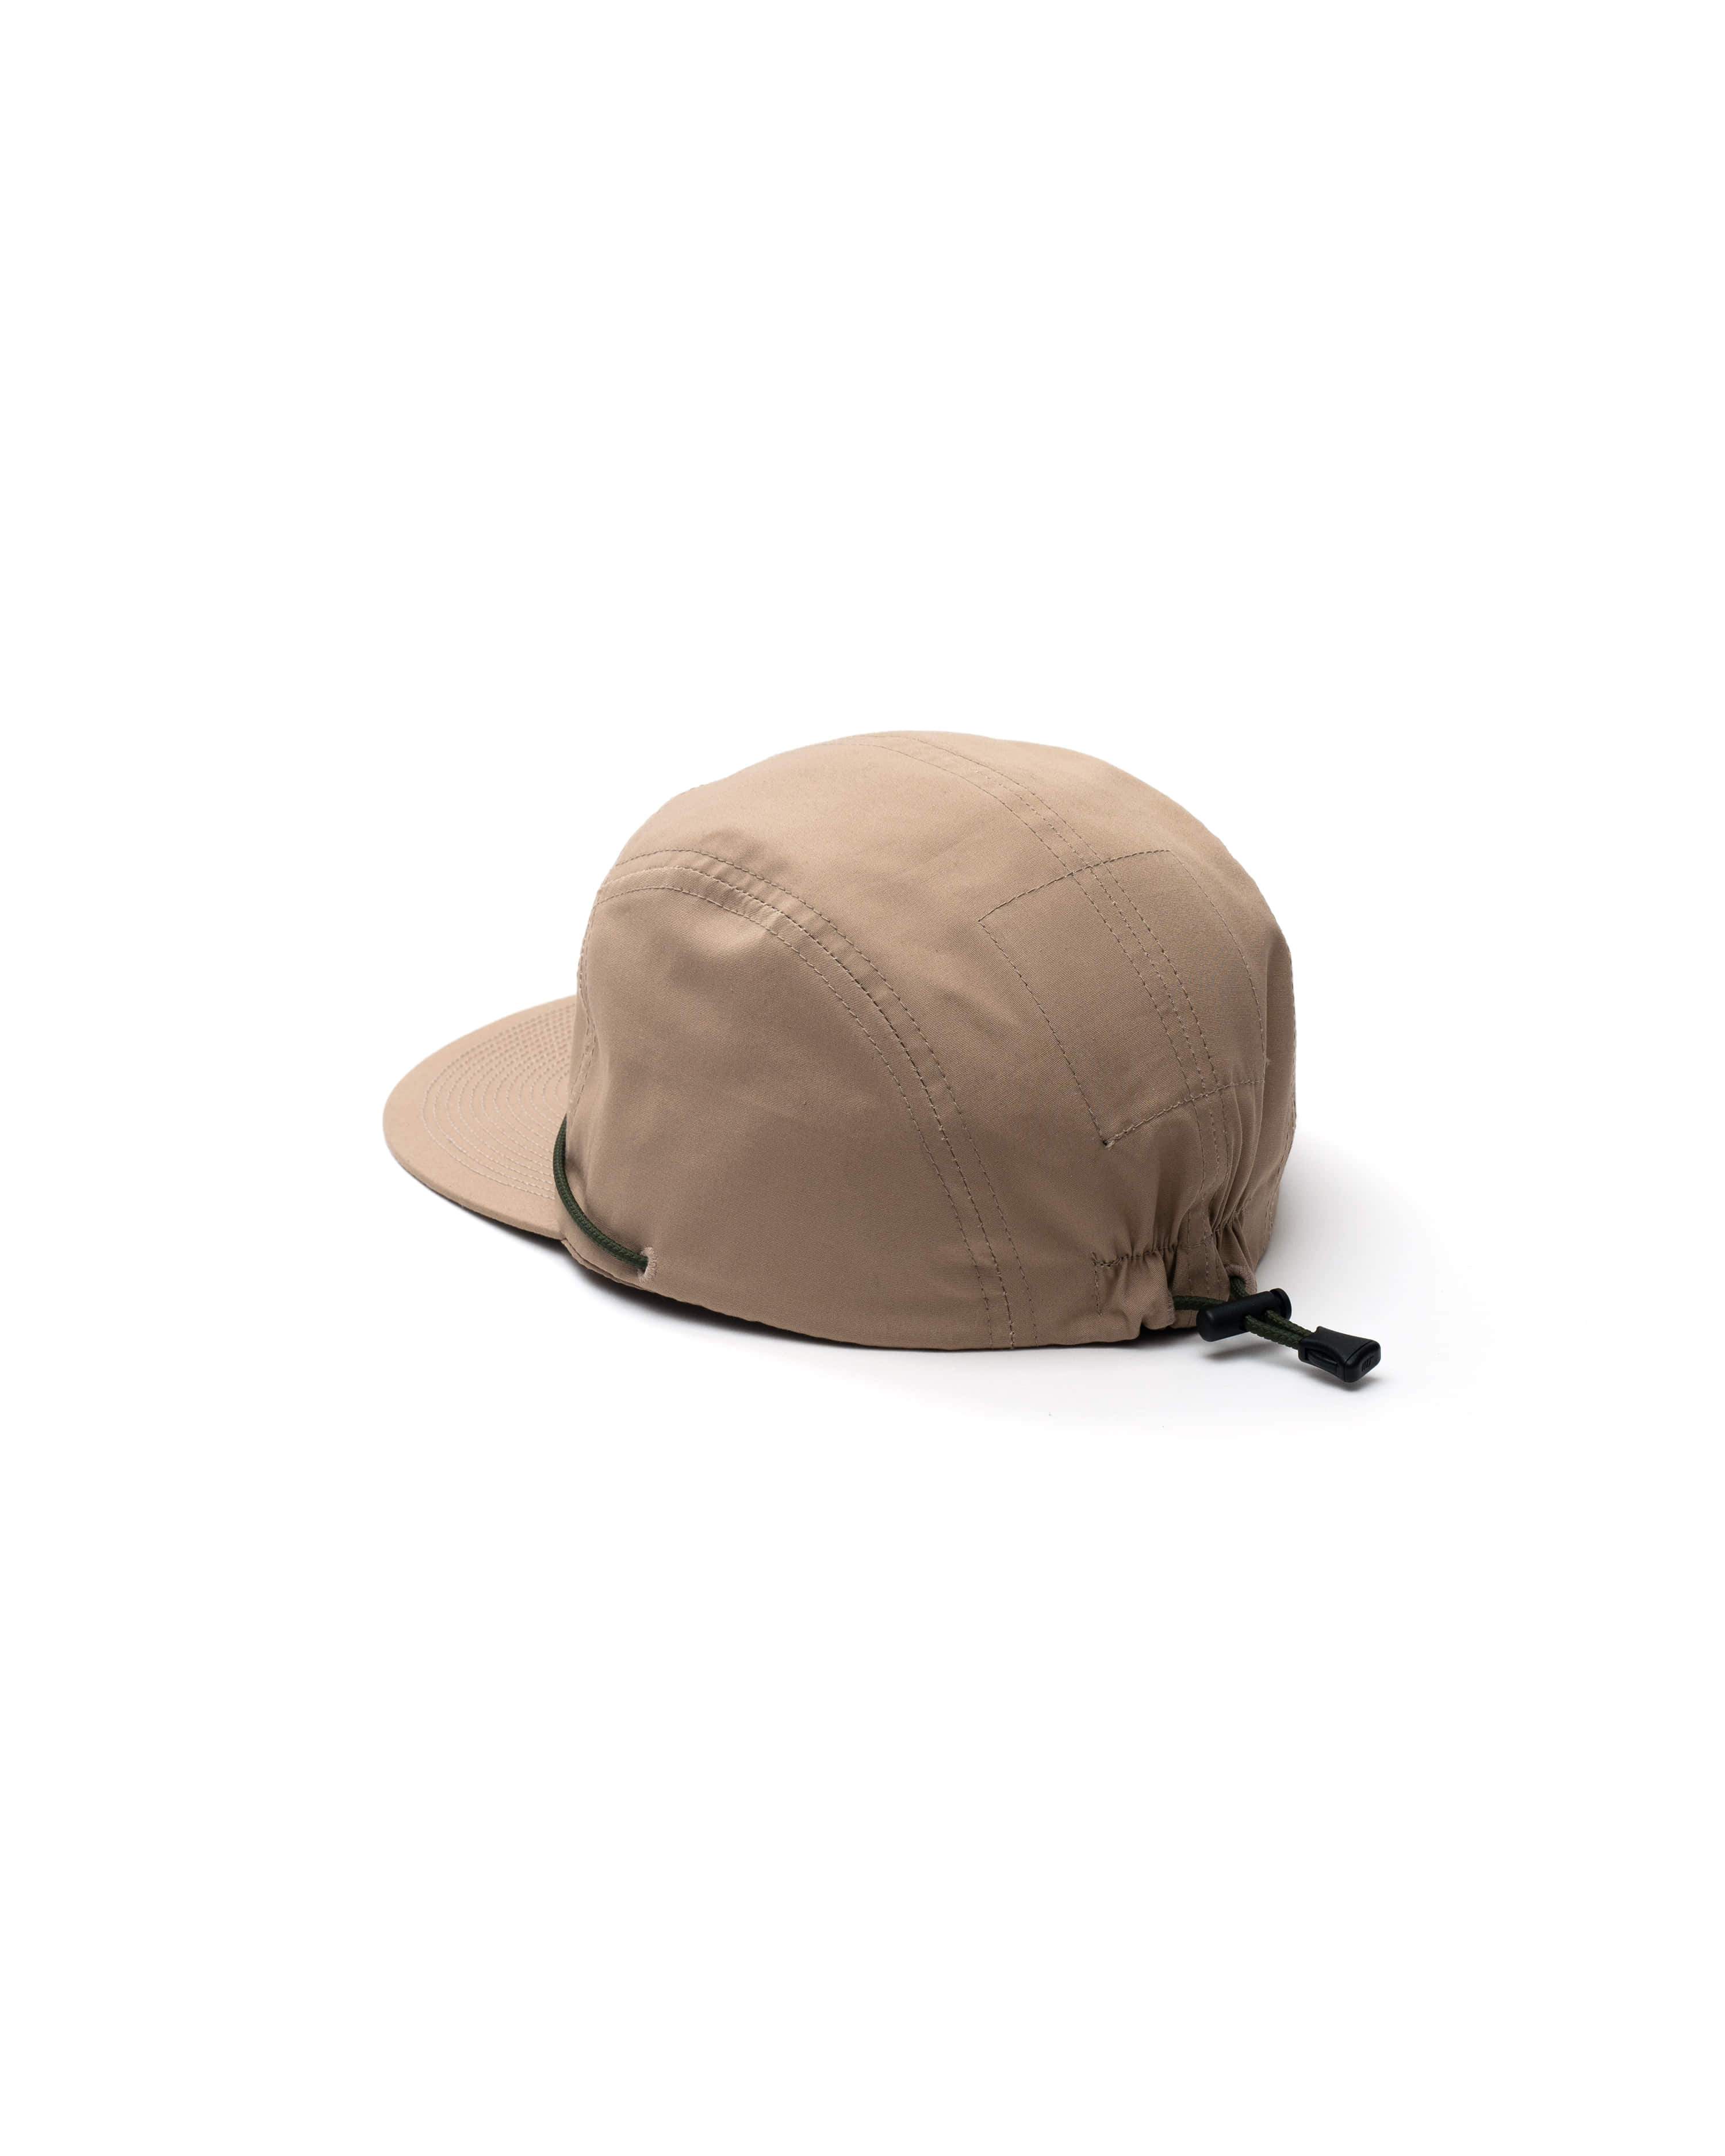 [out of stock] Boat 1 - Beige (Ventile Fabric)